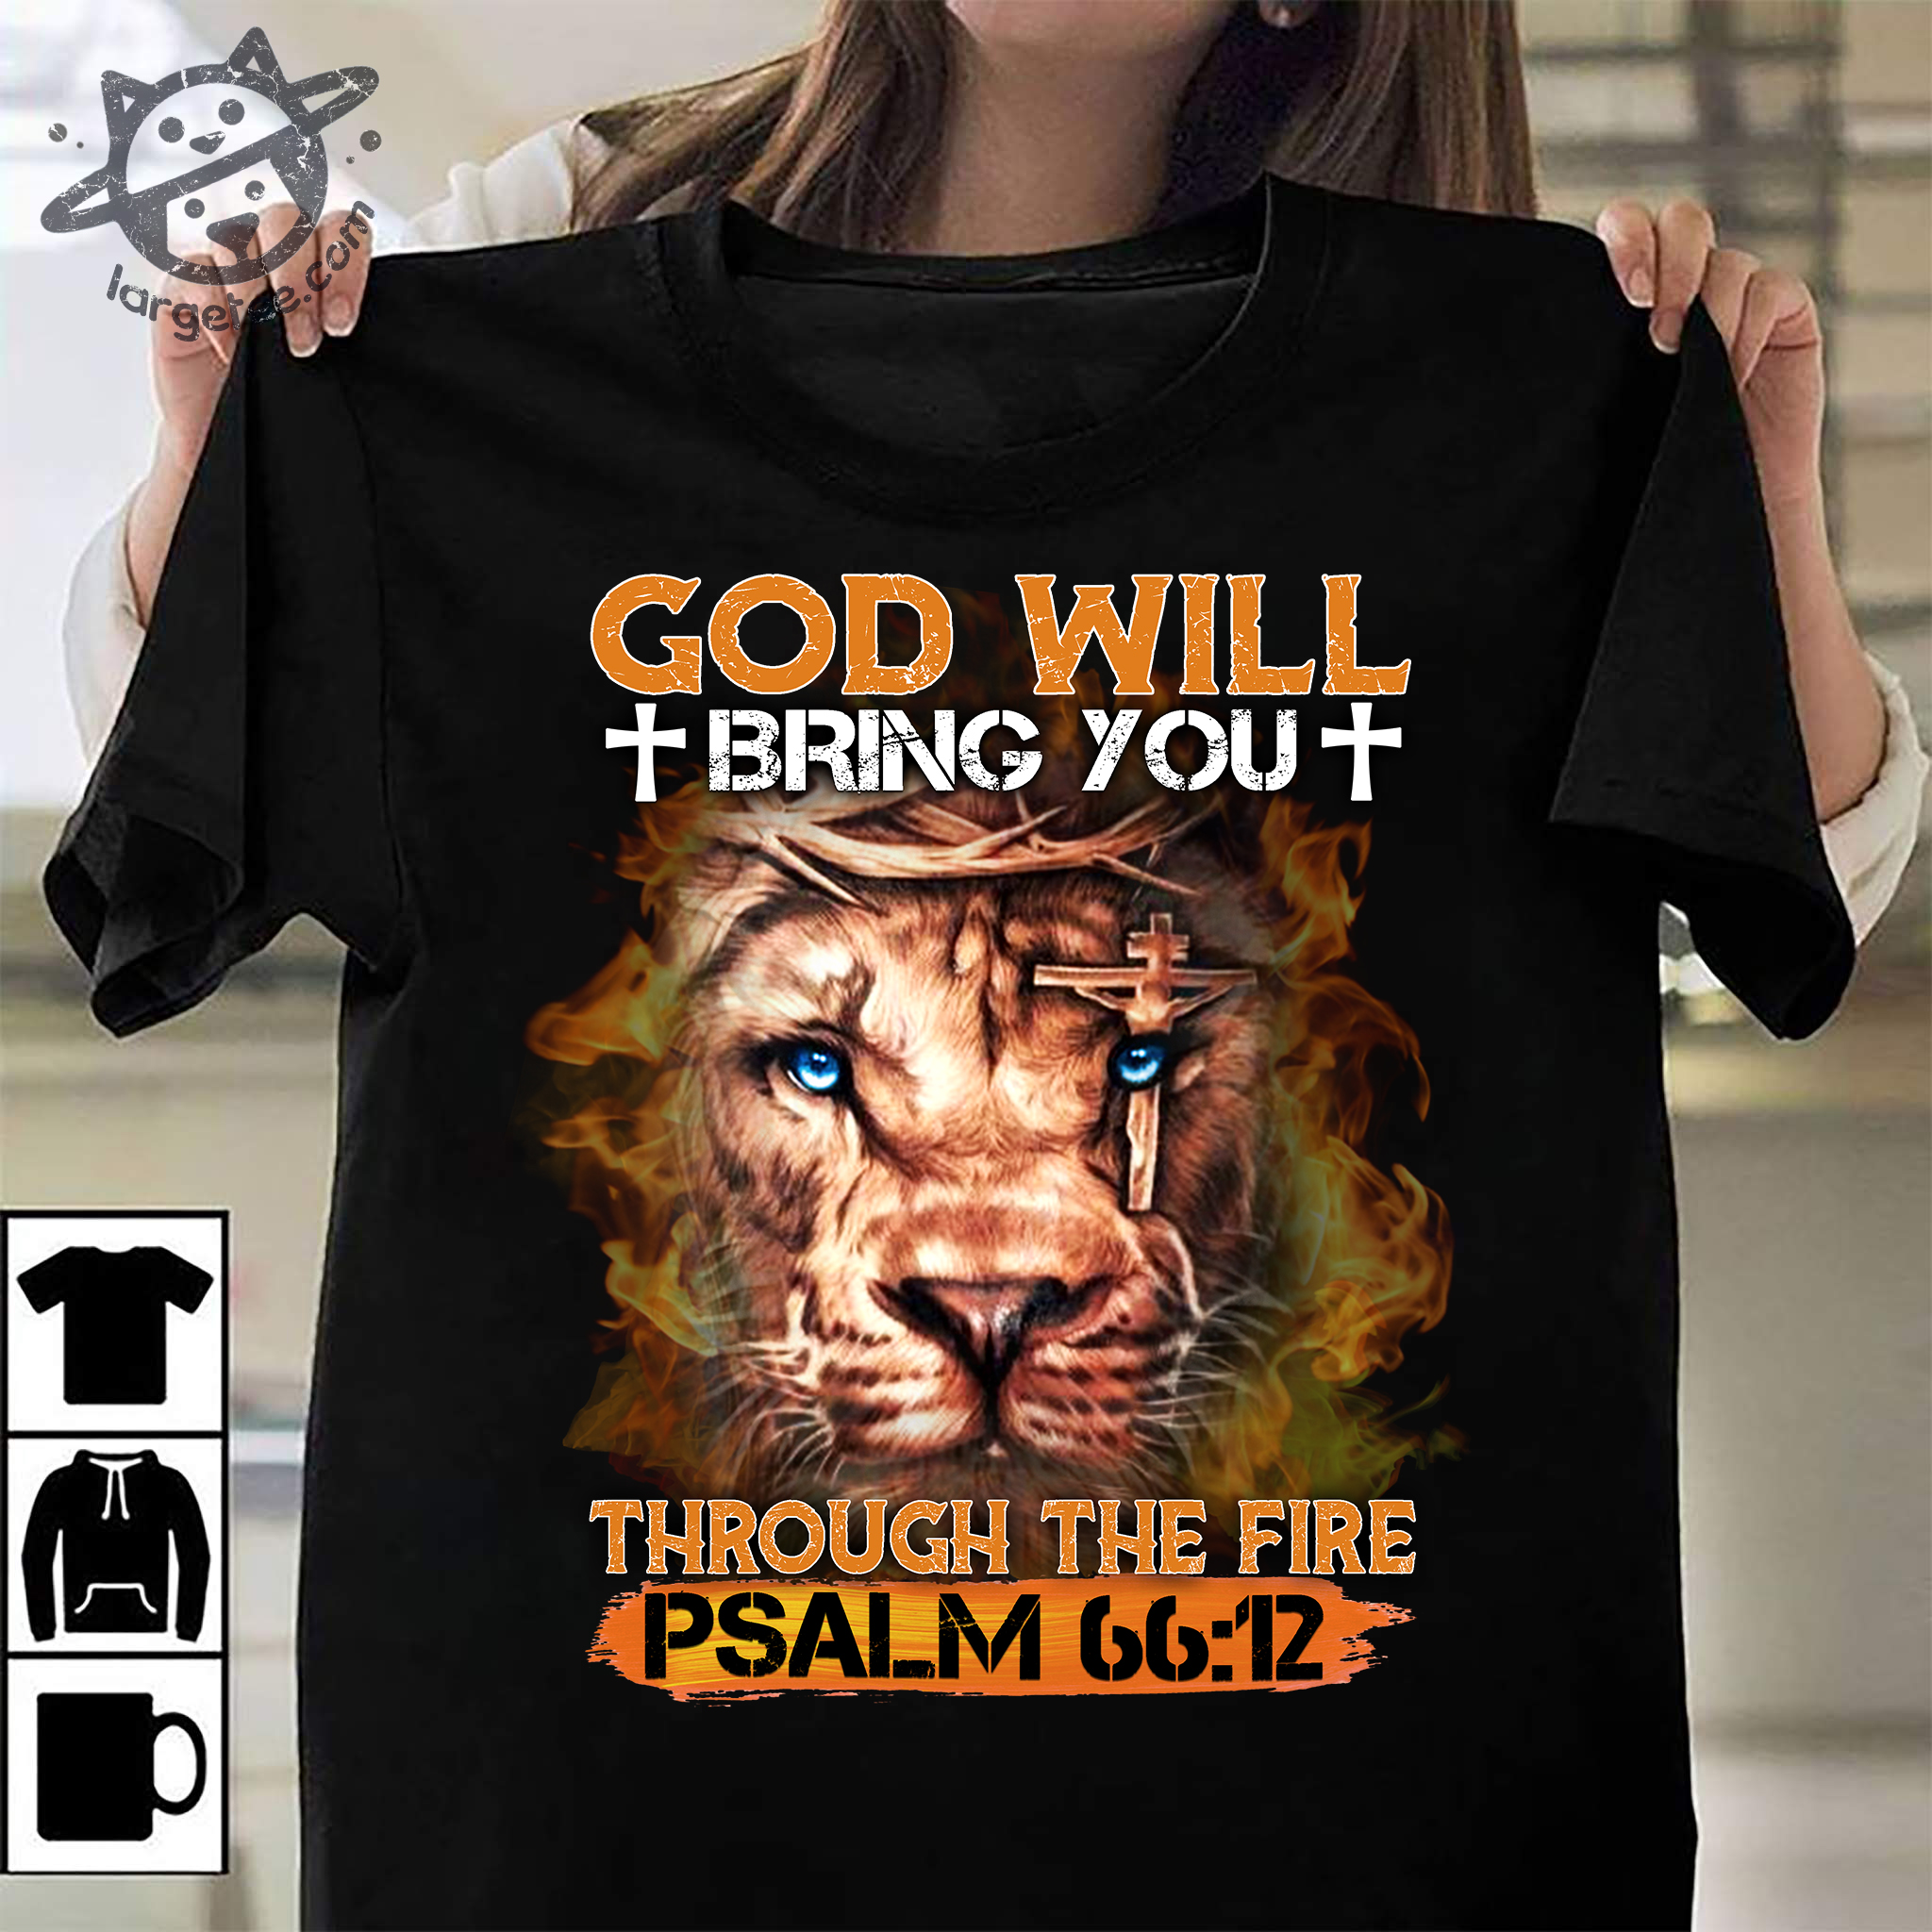 God will bring you through the fire Psalm - Lion and god